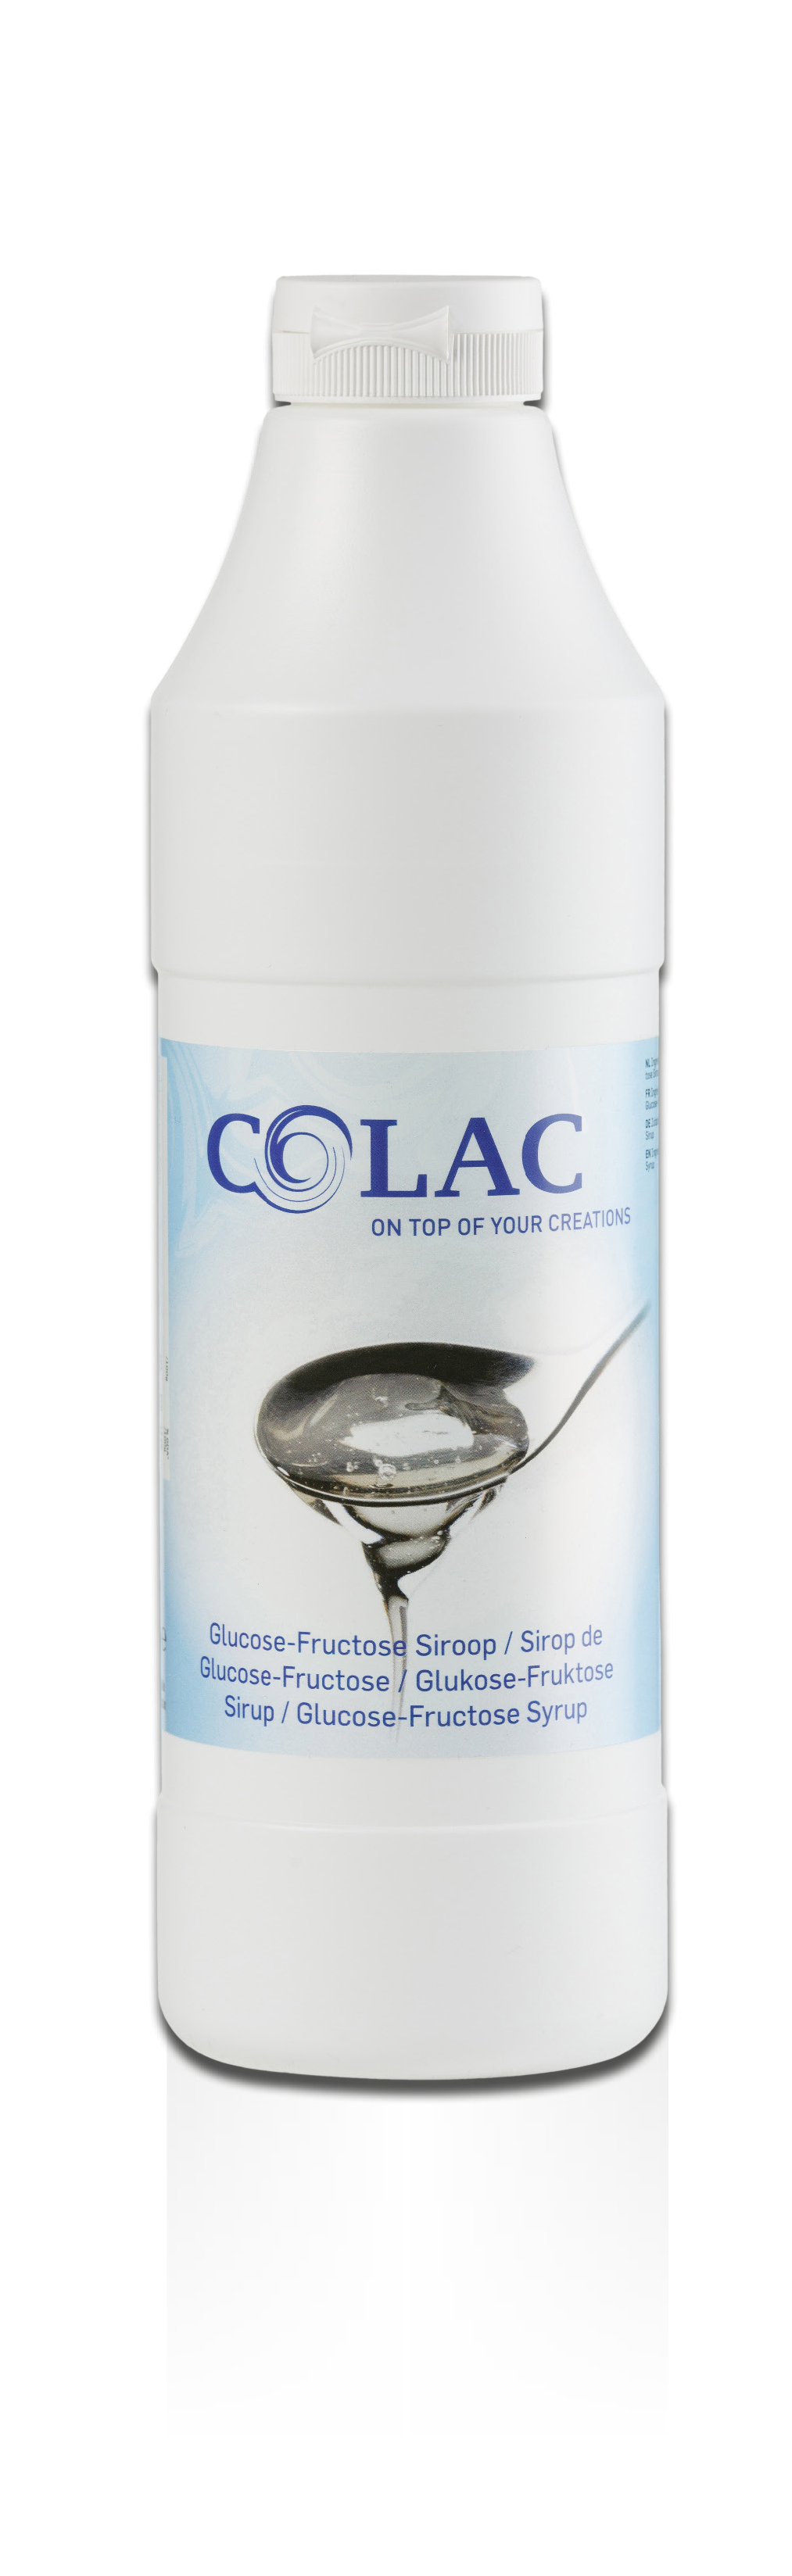 Glucose syrup 1kg 2.2lbs Colac